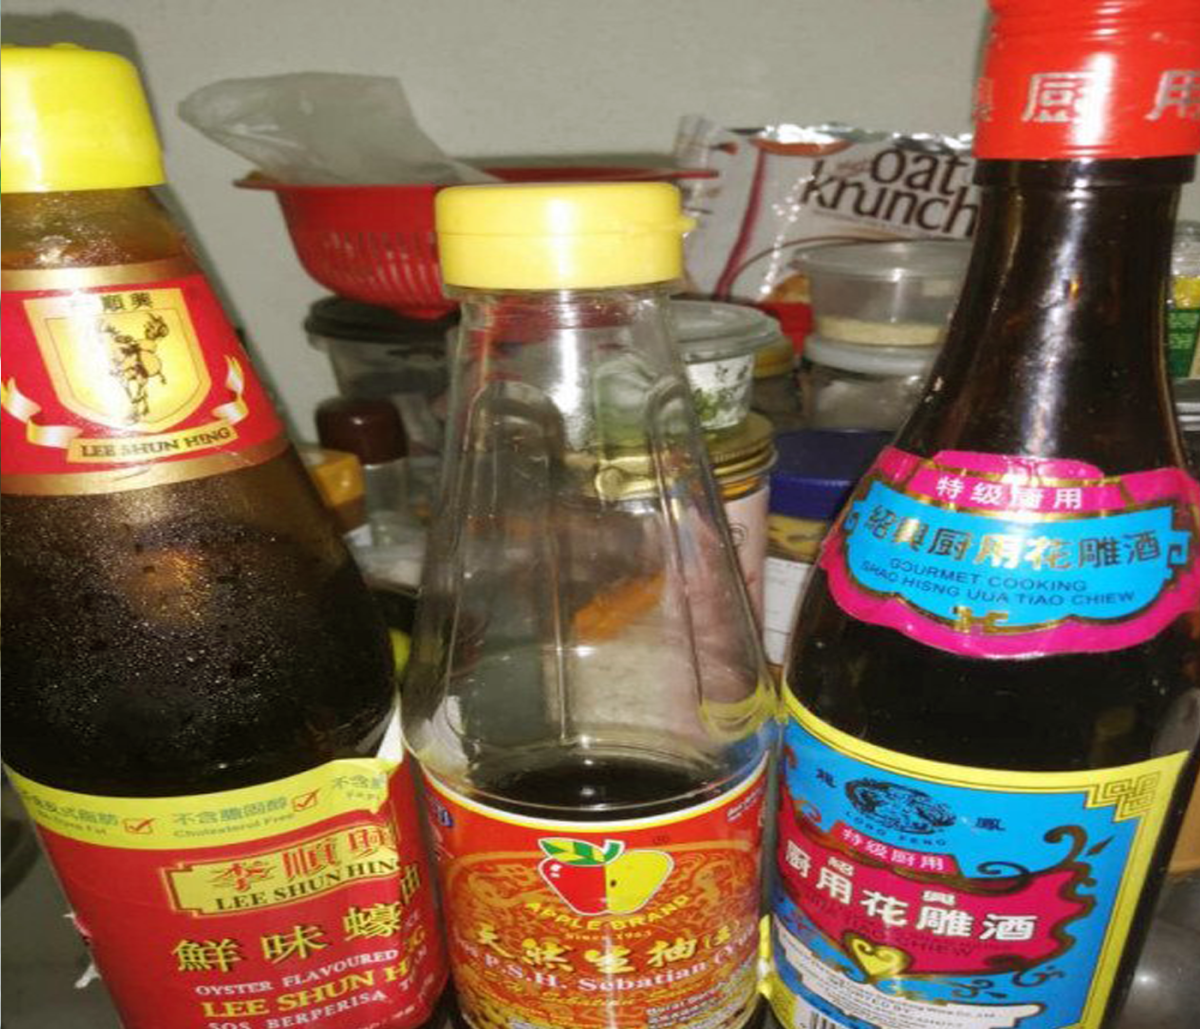 (L - R) Oyster sauce, light soy sauce, and Shao Xing wine 